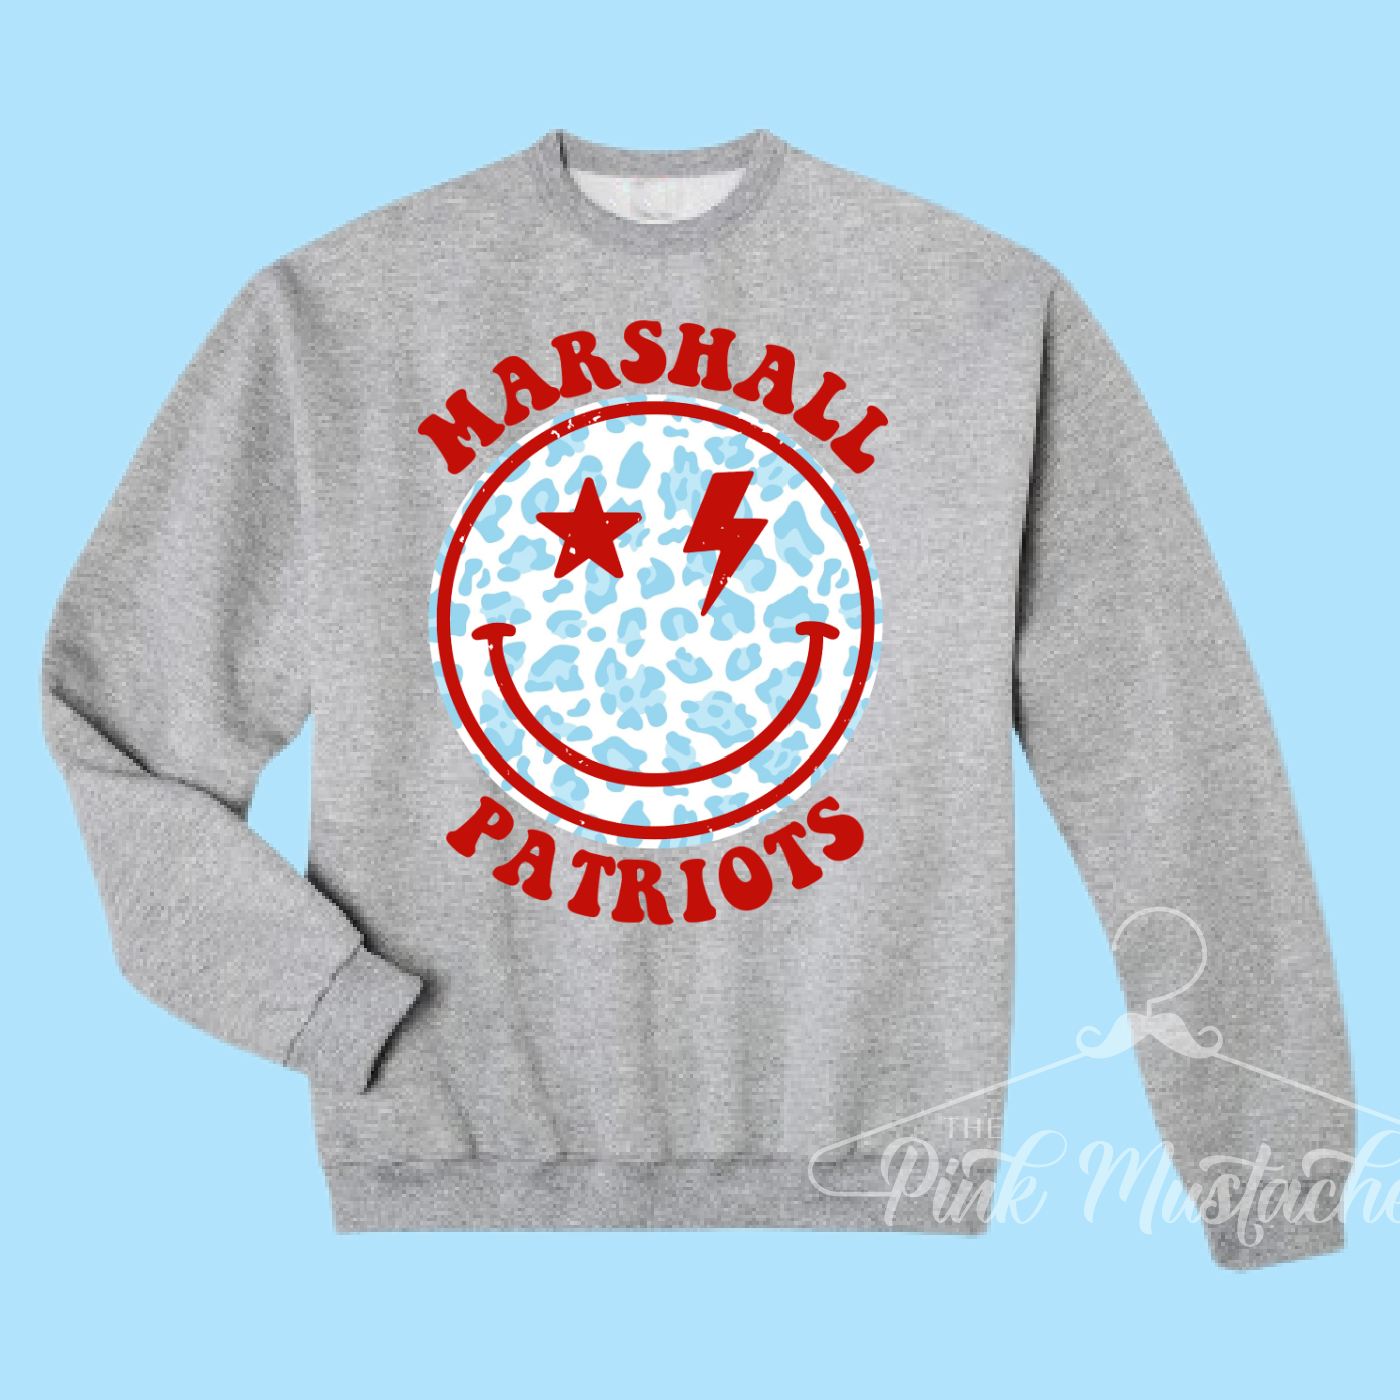 Marshall Patriots Distressed Smiley Unisex Sweatshirt / Toddler, Youth, and Adult Sizes/ Lewisburg / Mississippi School Shirt